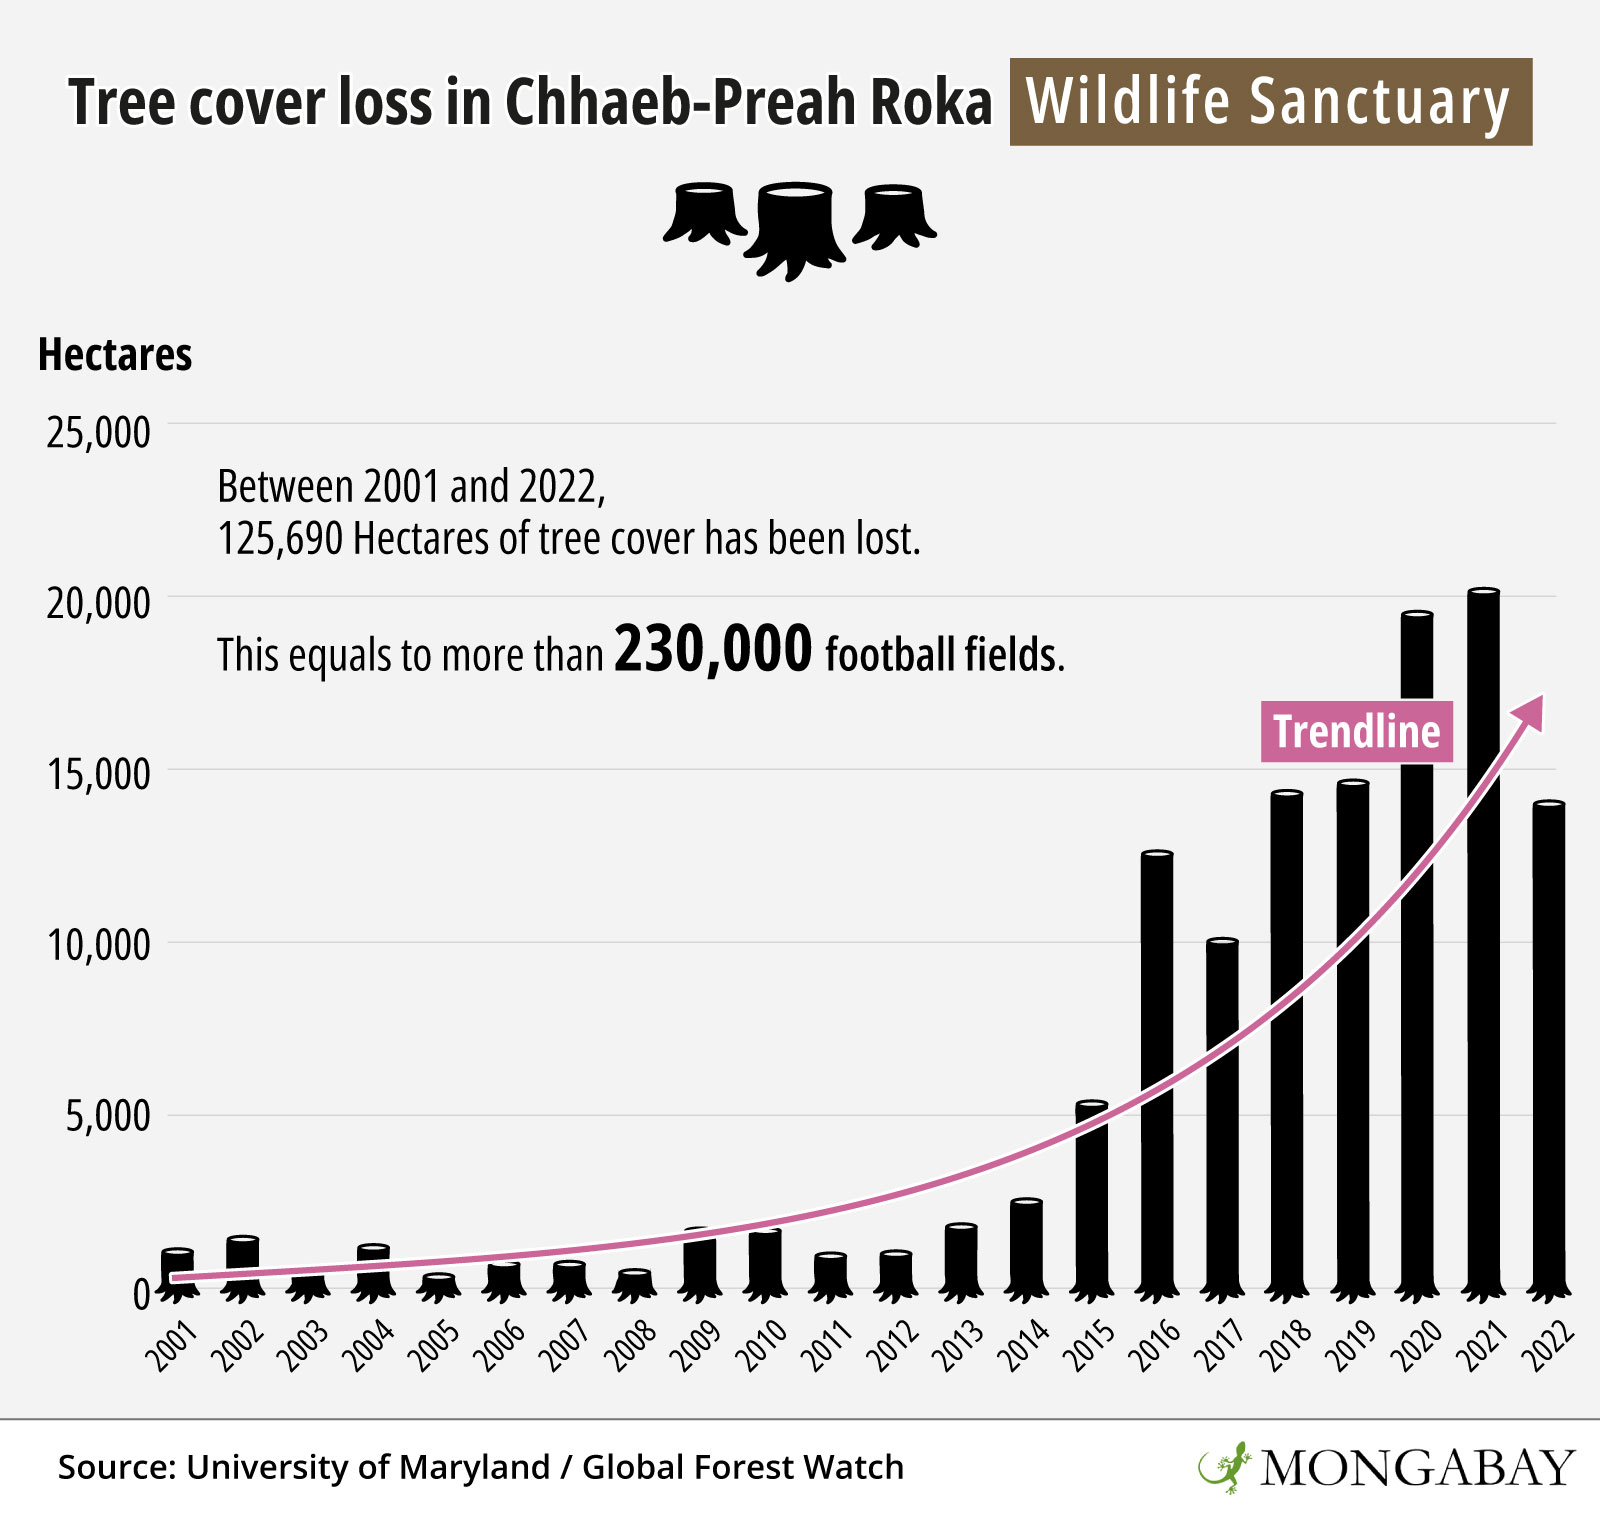 Global Forest Watch data show the extent of the damage wrought upon the protected Chhaeb-Preah Roka Wildlife Sanctuary. Image by Andrés Alegría / Mongabay.